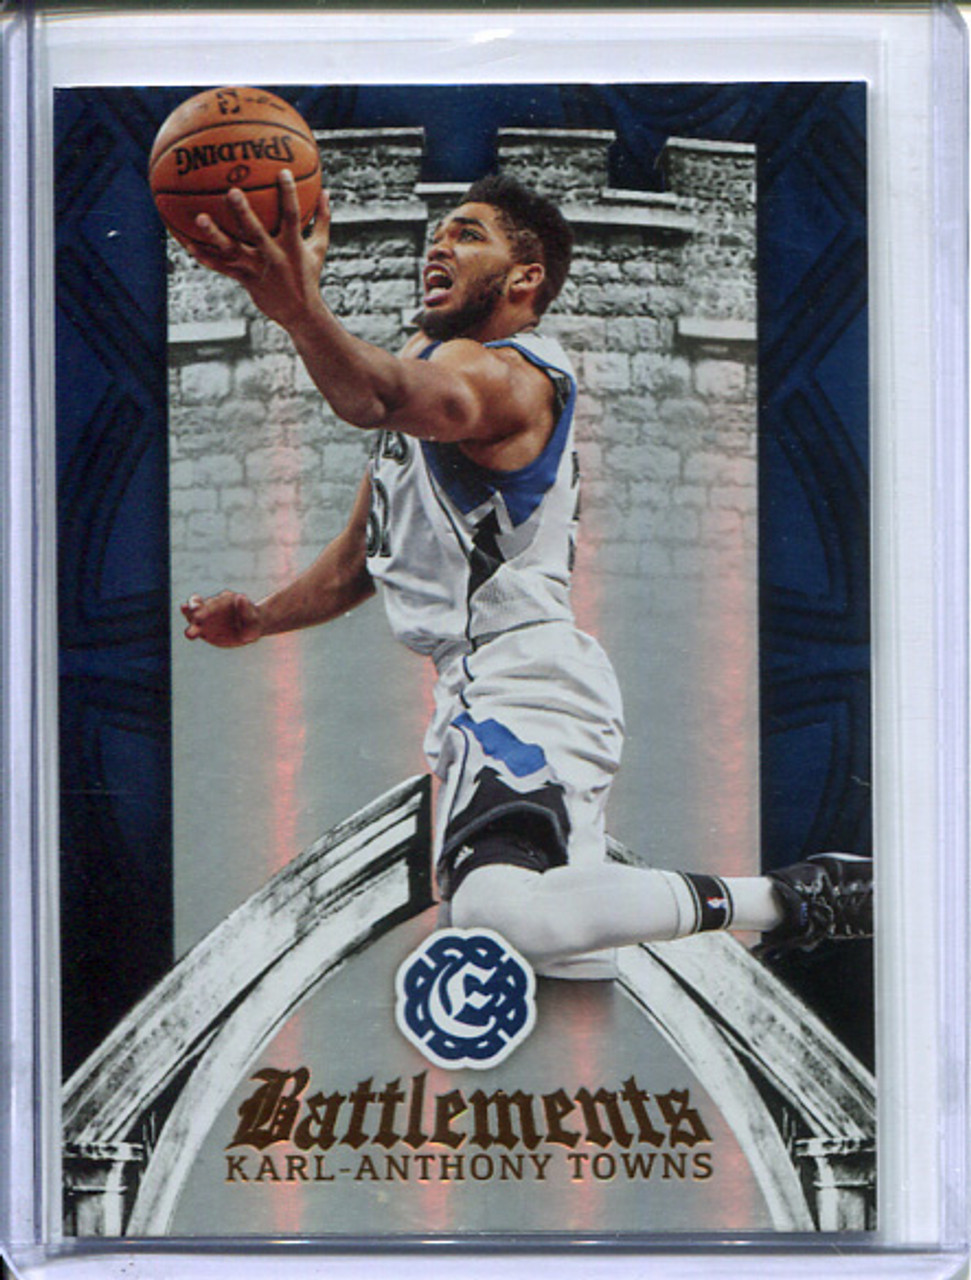 Karl-Anthony Towns 2016-17 Excalibur, Battlements #7